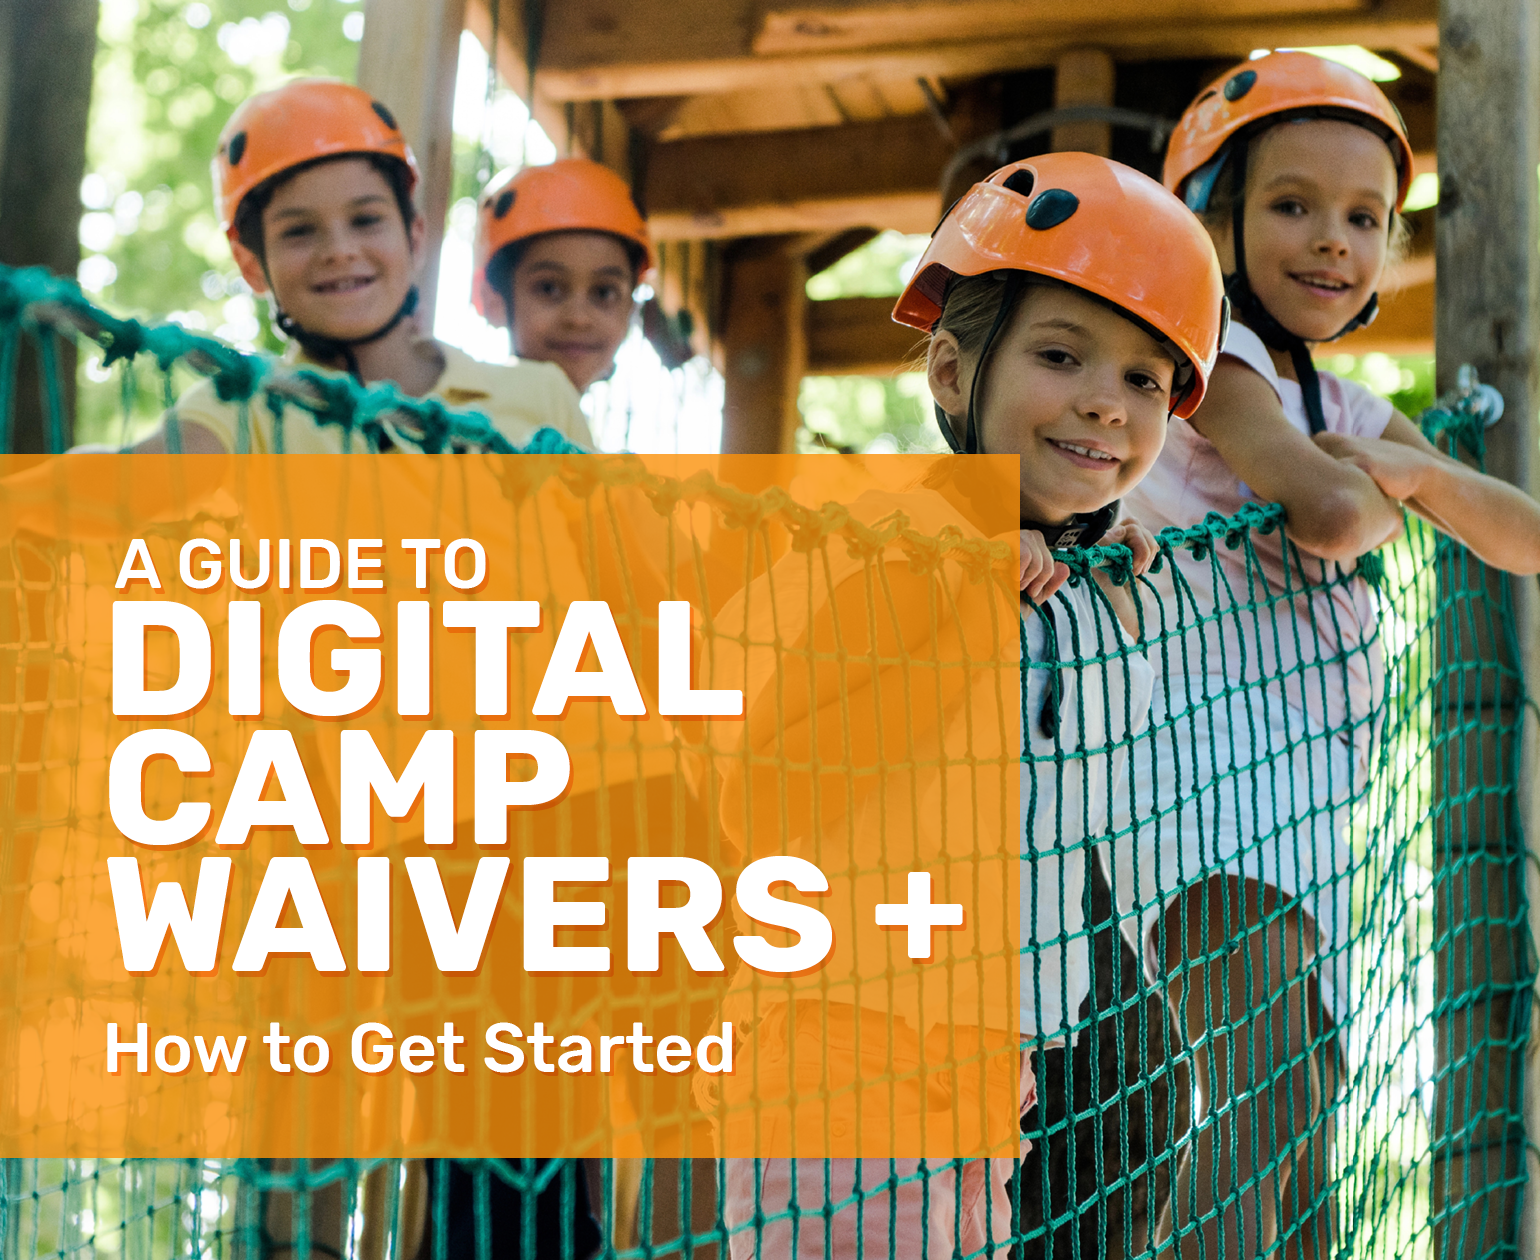 A Guide to Digital Camp Waivers + How to Get Started